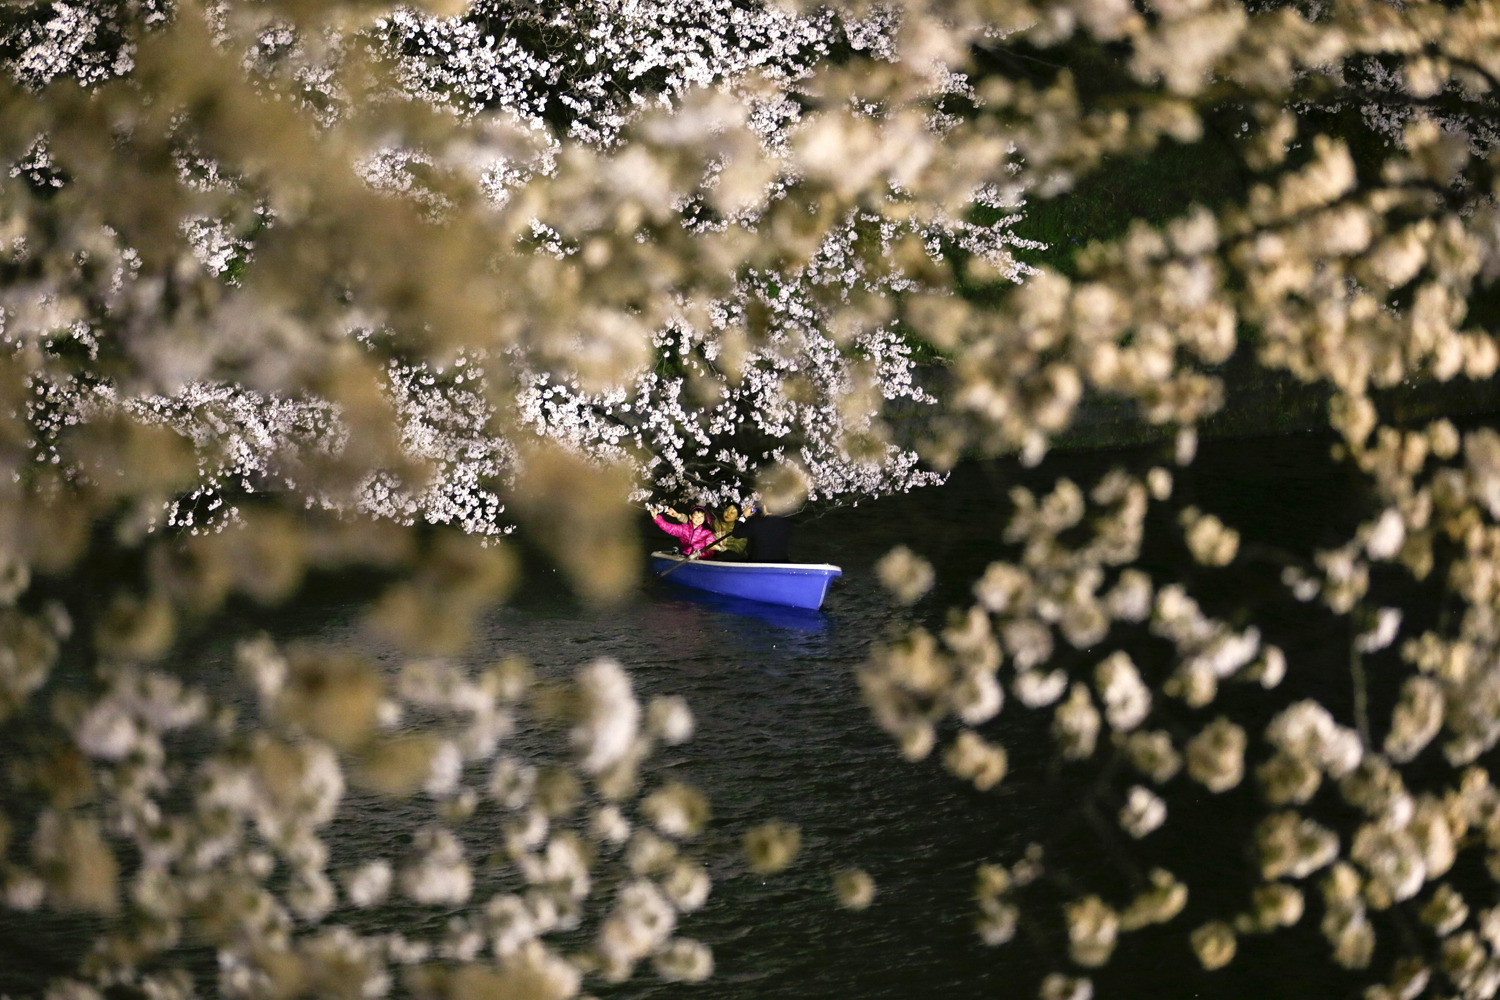 People row a boat and enjoy viewing cherry blossoms in full bloom on Chidorigafuchi moat at The Imperial Palace in Tokyo March 31, 2014.